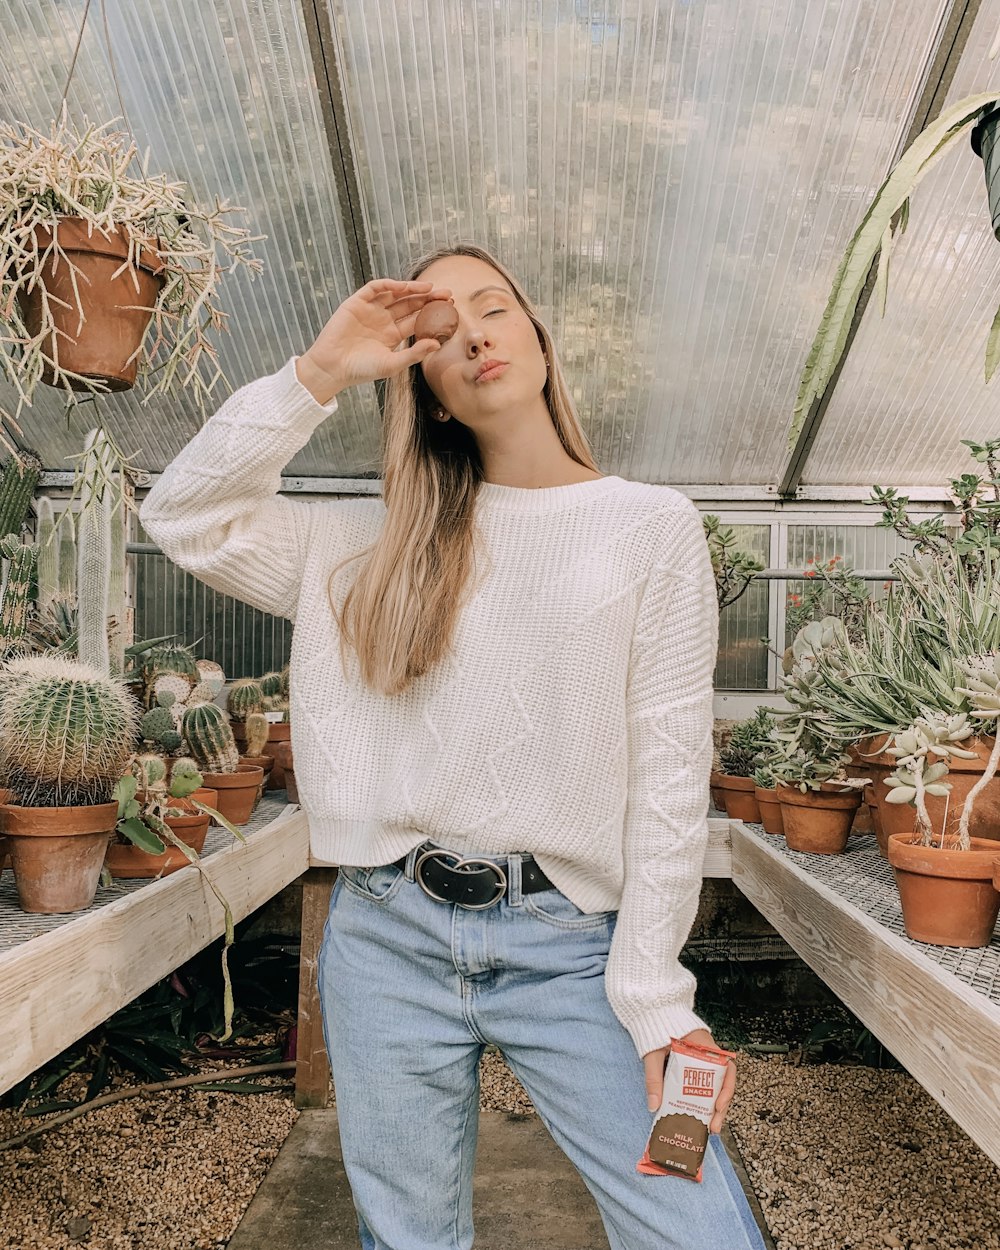 woman in white sweater and blue denim jeans standing near plants photo –  Free Desert Image on Unsplash